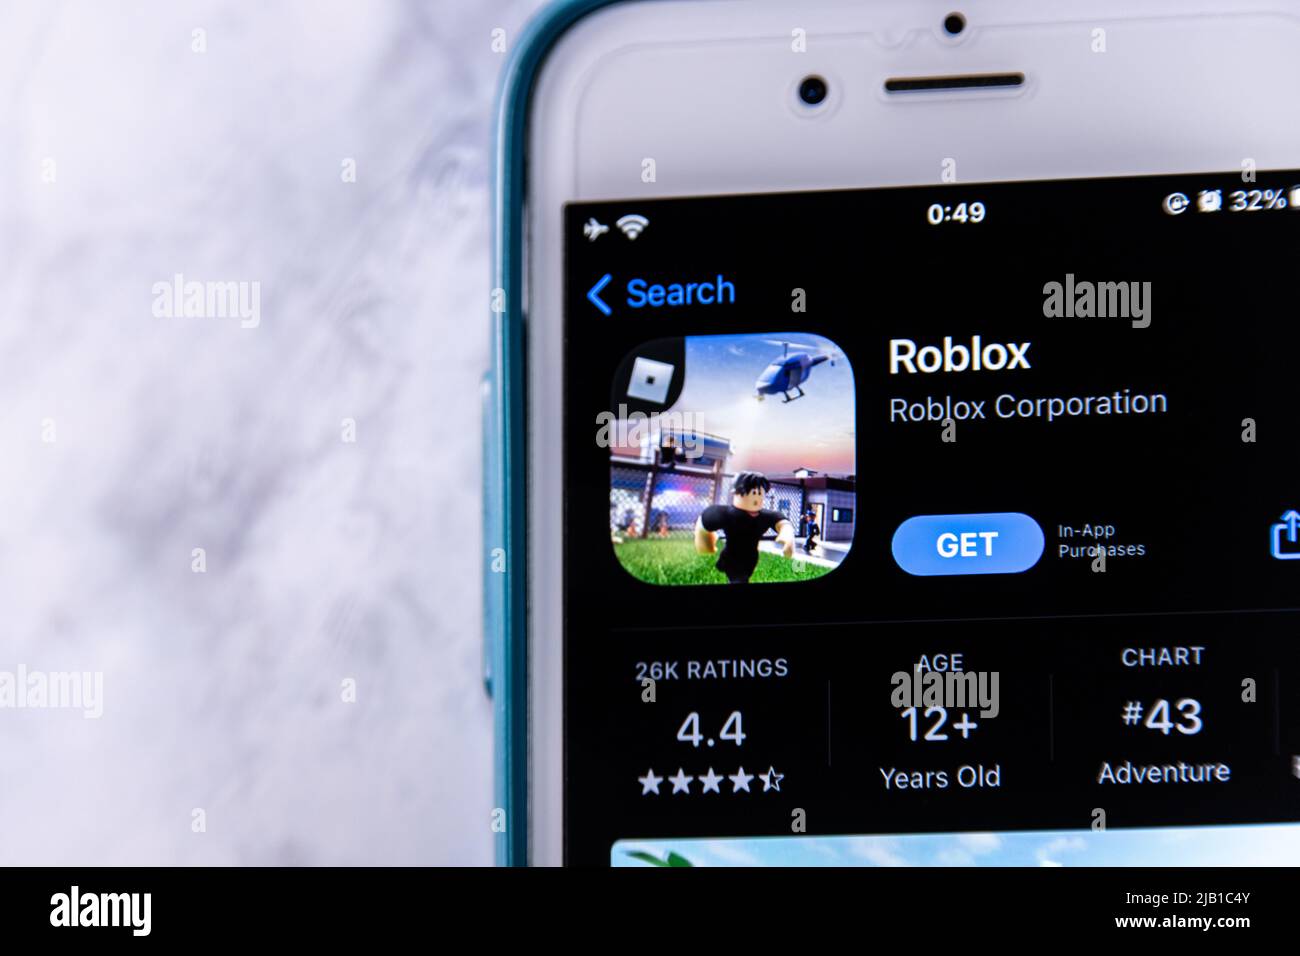 Roblox App Store. Close Up of Smartphone with Roblox Application Editorial  Photo - Image of gaming, digital: 212097366